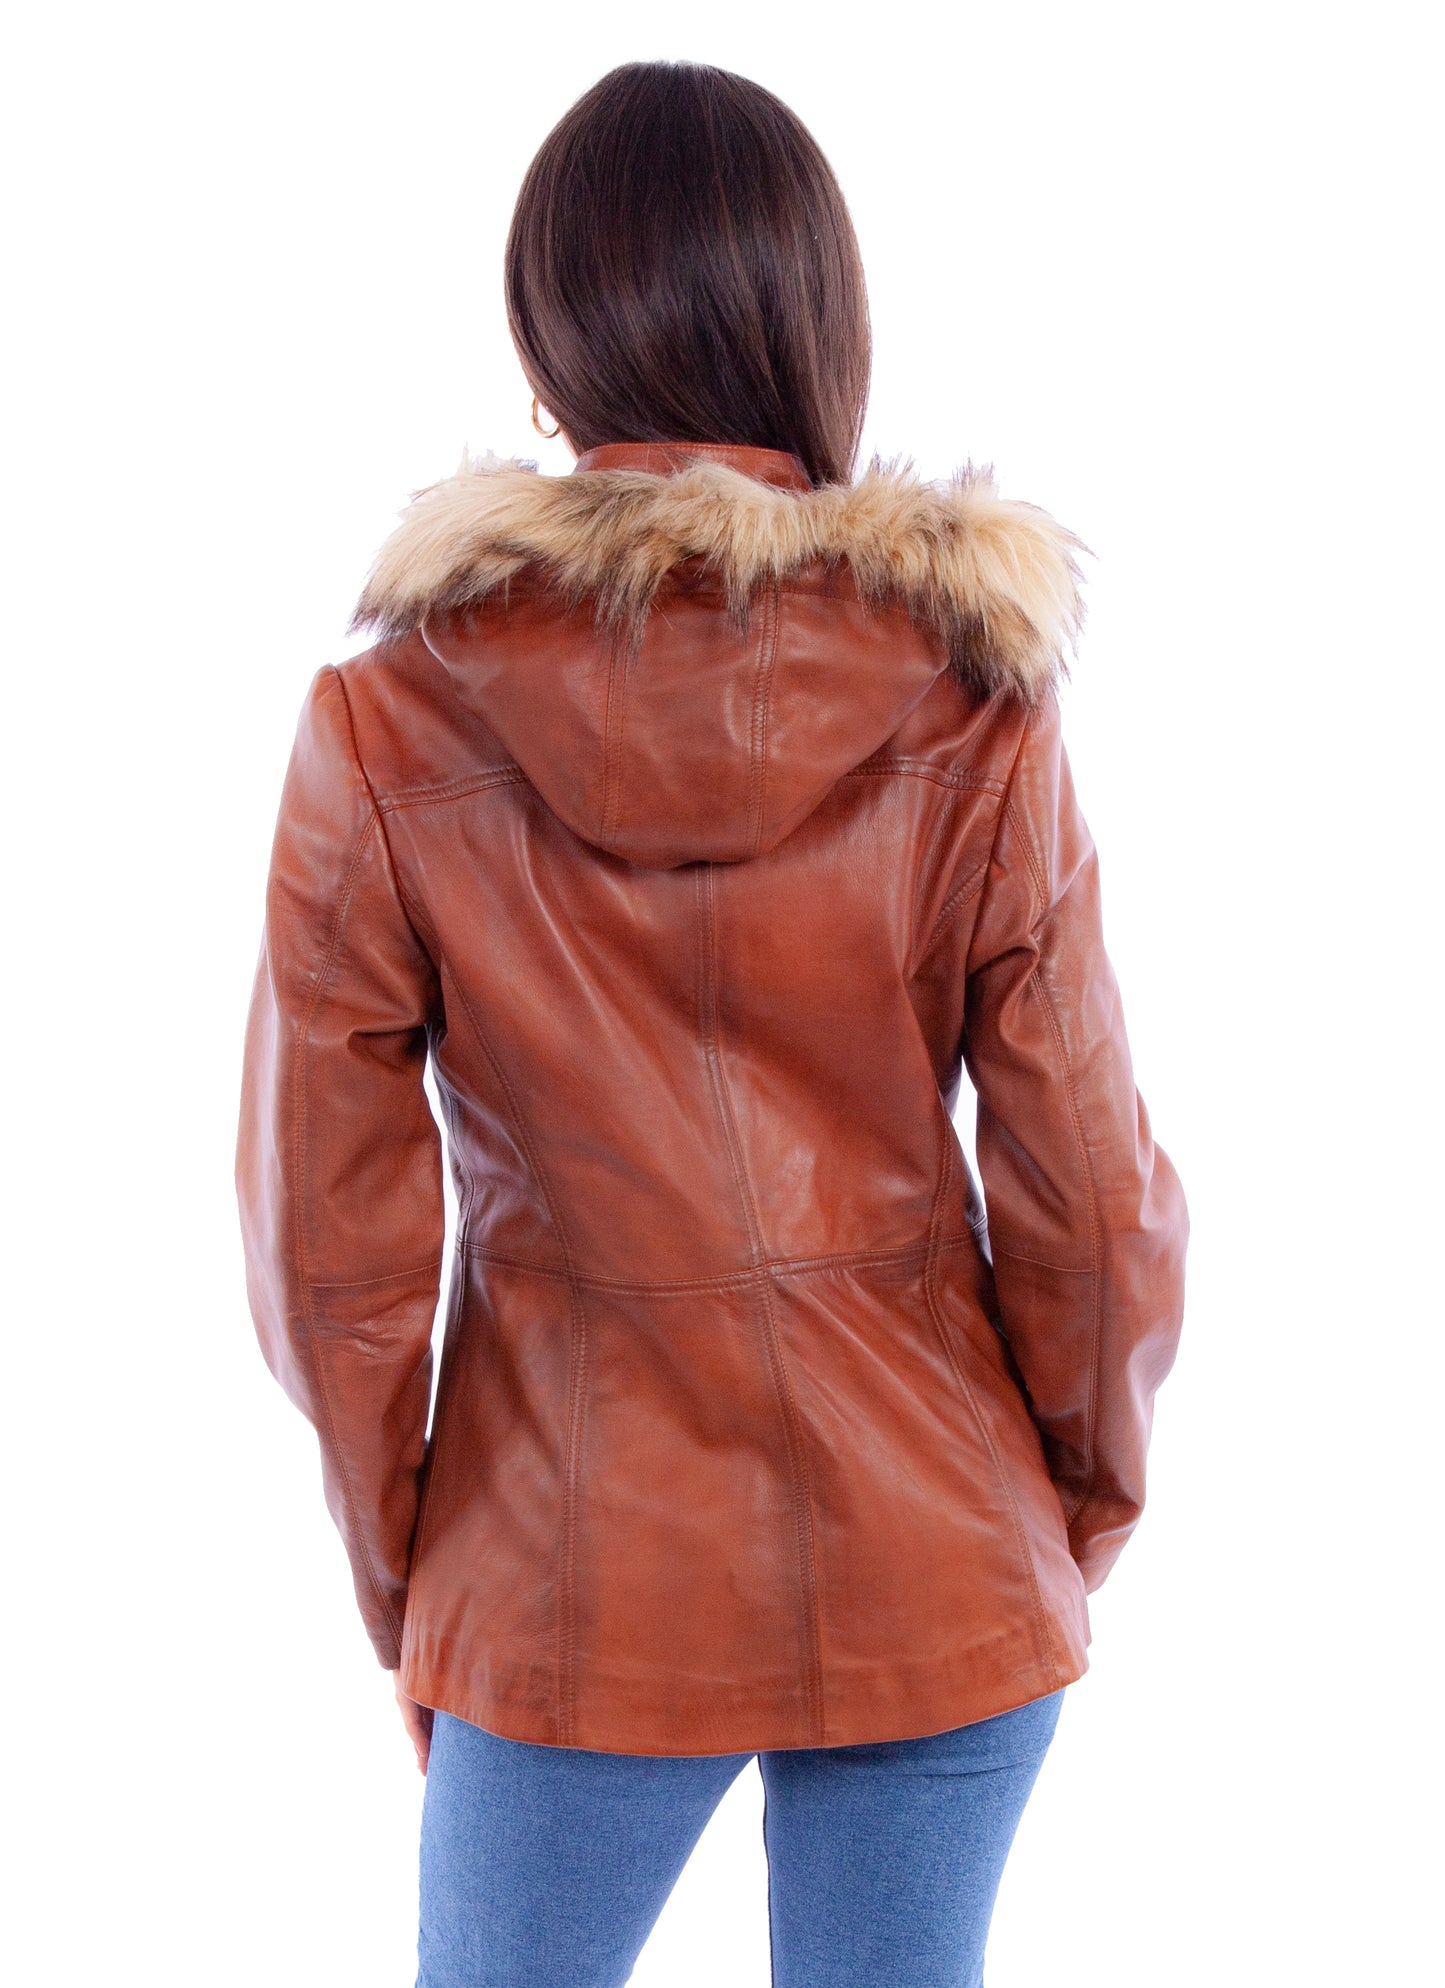 Brown Leather Jacket with Faux Fur Hood at Bourbon Cowgirl